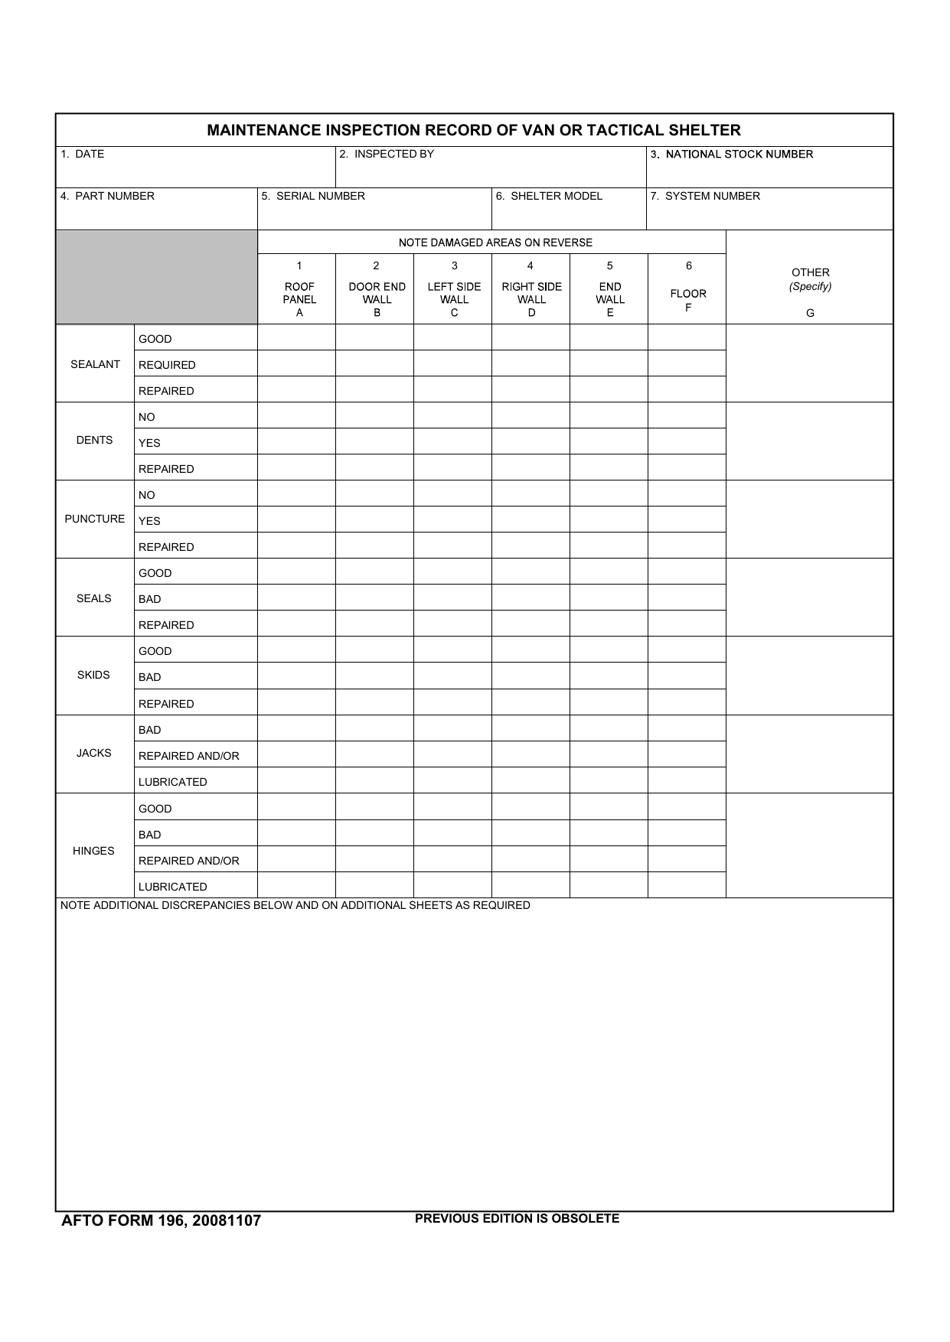 AFTO Form 196 Maintenance Inspection Record of Van or Tactical Shelter, Page 1